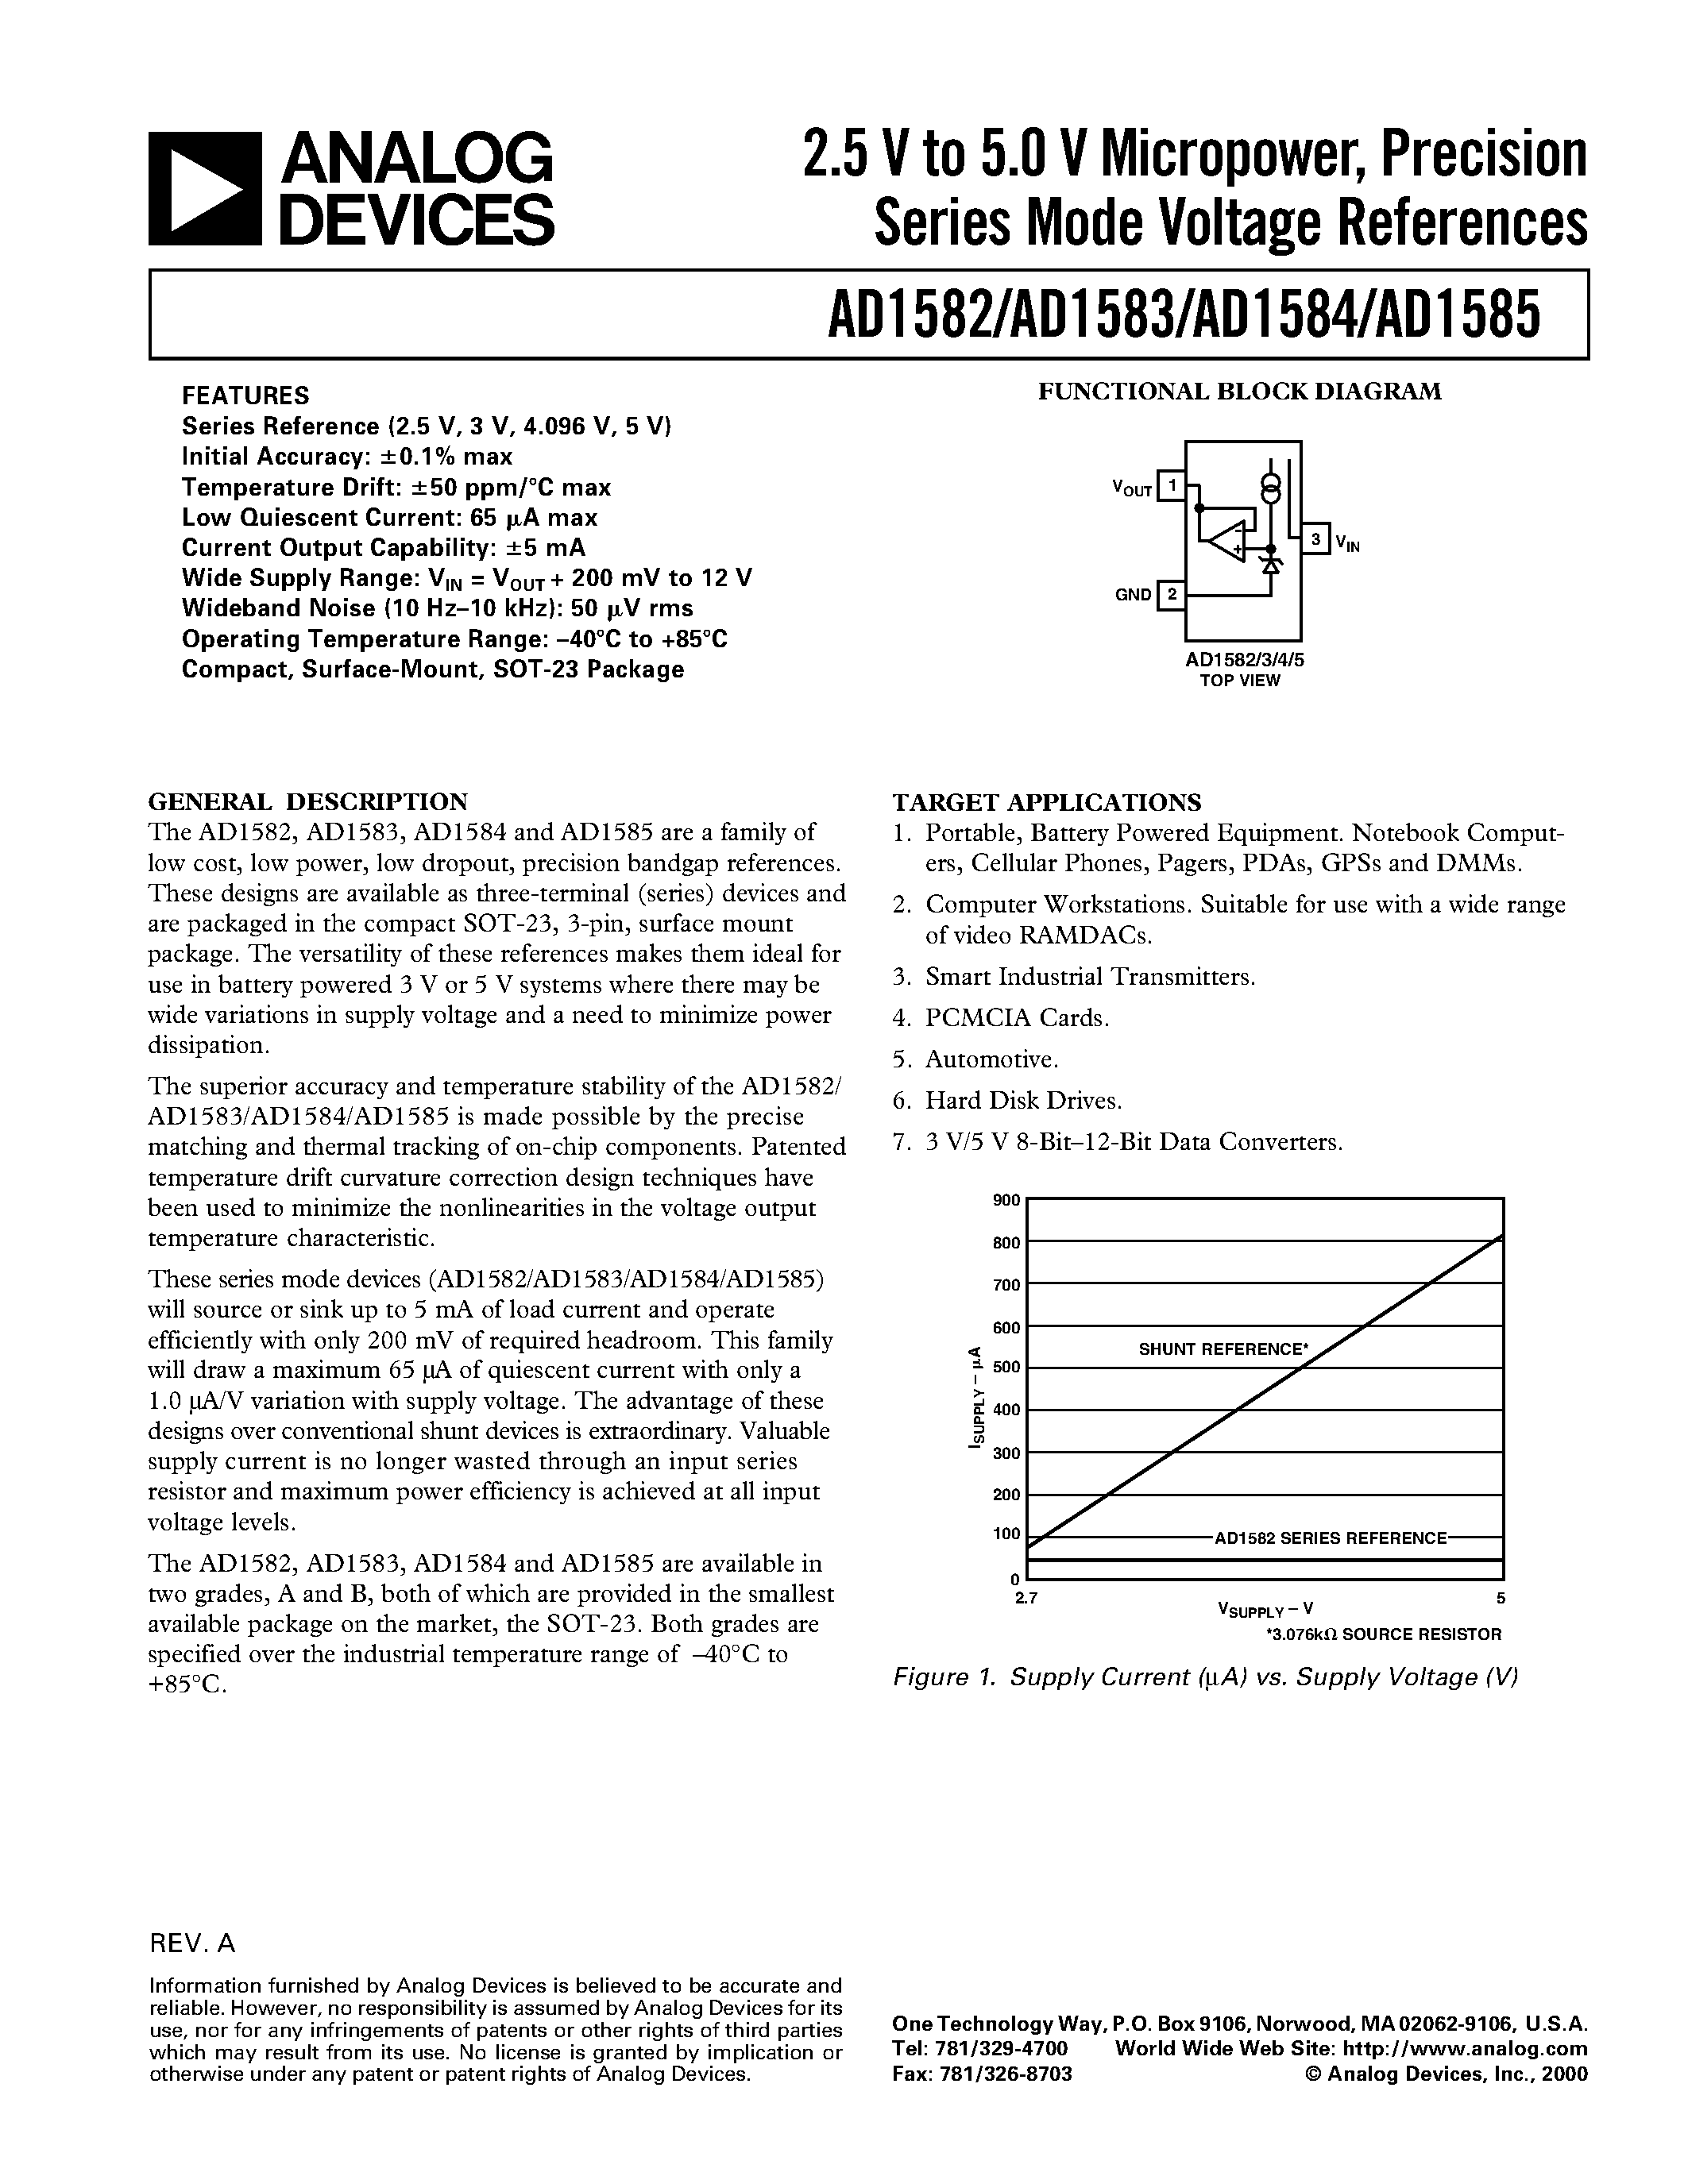 Datasheet AD1582A - 2.5 V to 5.0 V Micropower/ Precision Series Mode Voltage References page 1